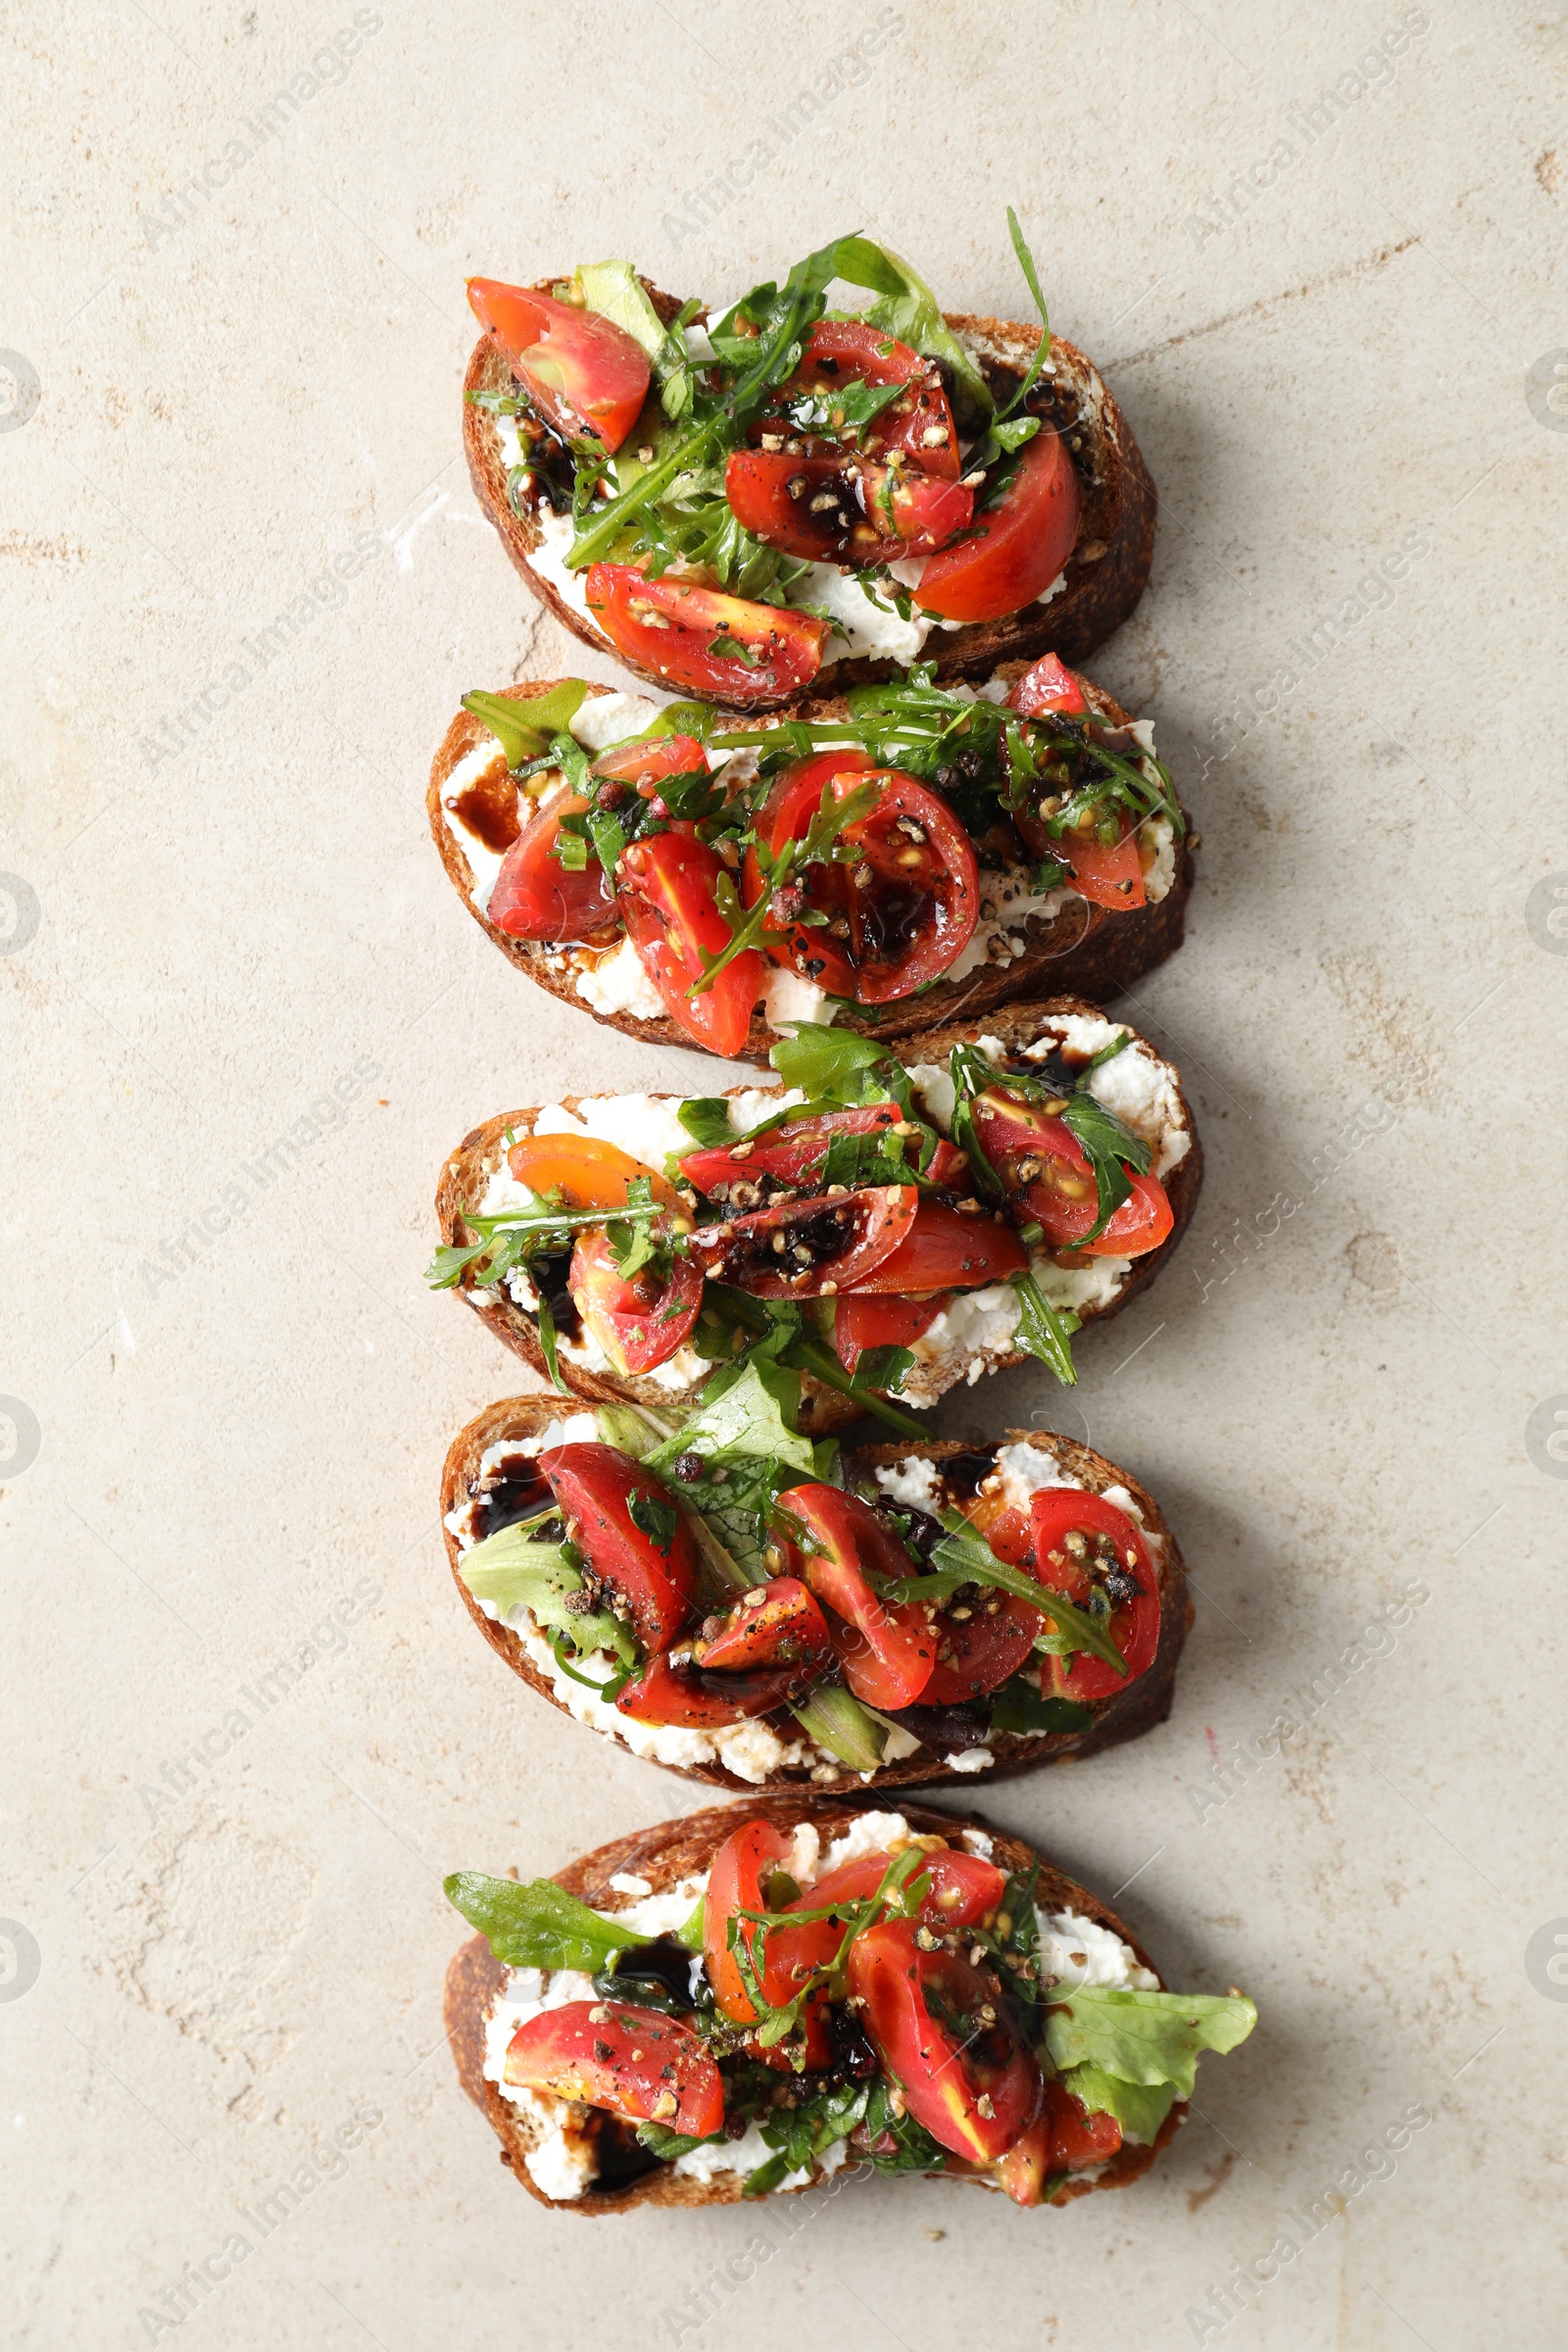 Photo of Delicious bruschettas with ricotta cheese, tomatoes and arugula on light textured table, flat lay